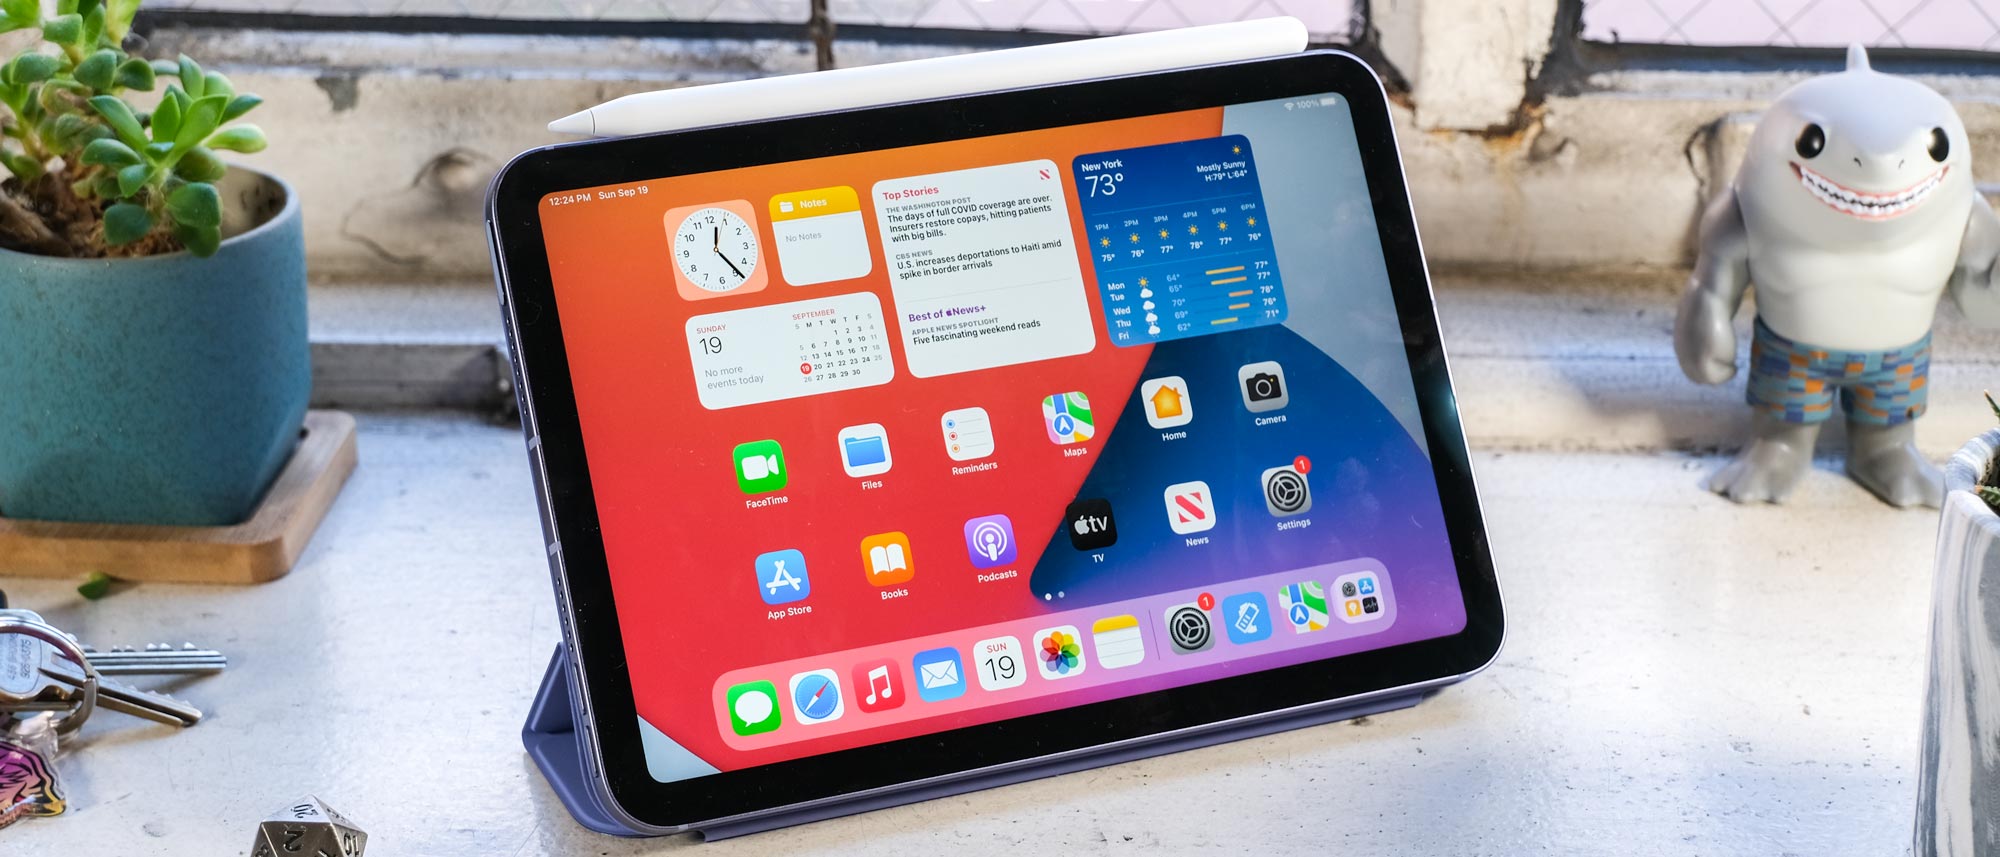 How to reset an iPad: Factory restore, soft reset and force restart